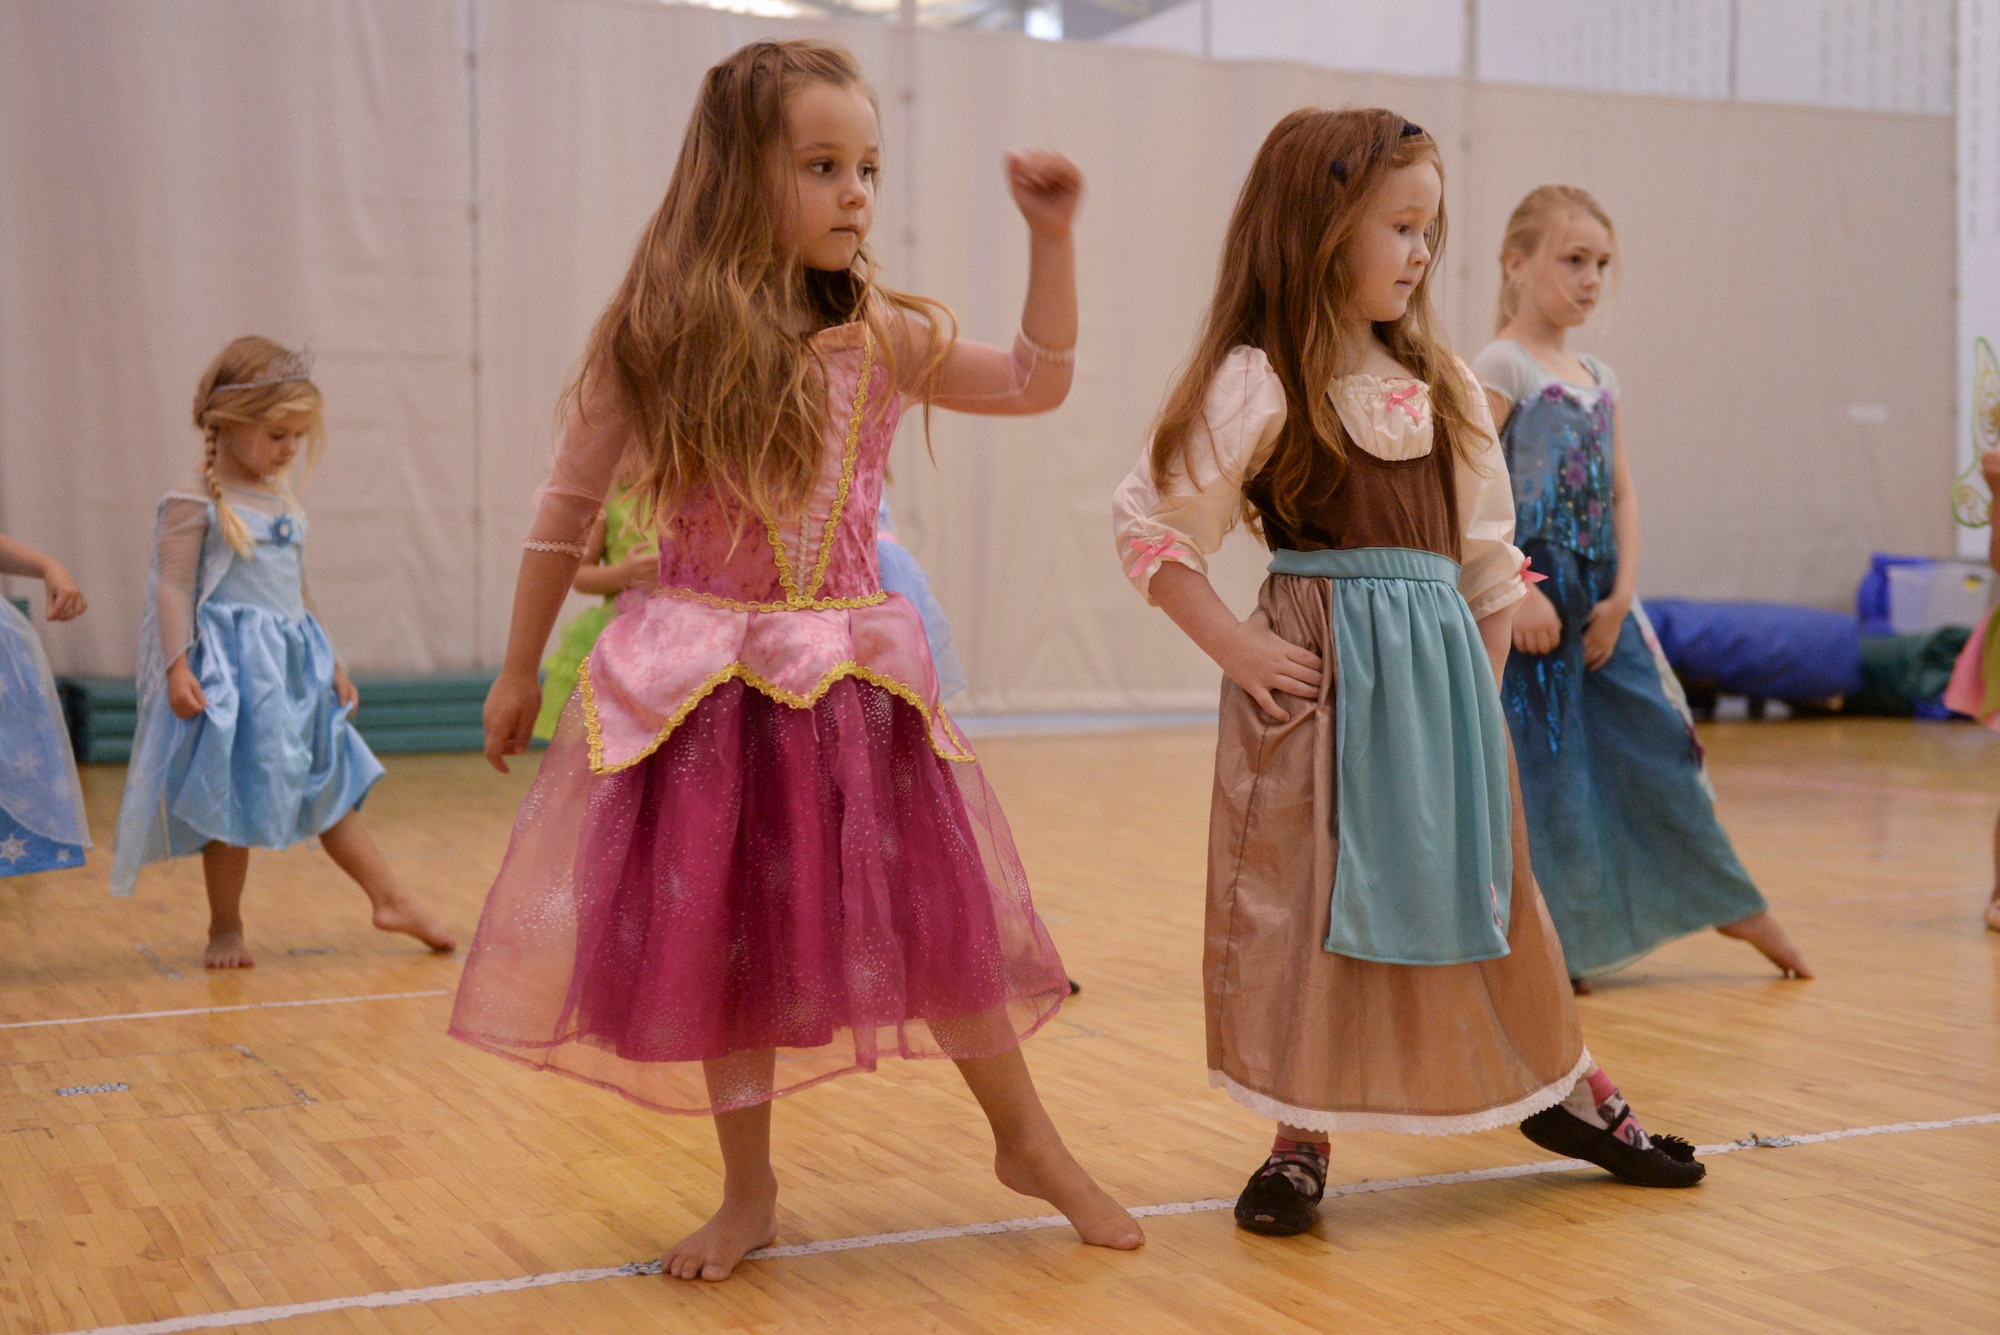 Military children Aubrey Moscato and Maggie Cutler preform a tendu during Princess Dance Camp at Minot Air Force Base, N.D., June 29, 2016. Students were taught basic instructions for beginner ballet though the week-long course offered by the youth center. (U.S. Air Force photo/Airman 1st Class Jessica Weissman)